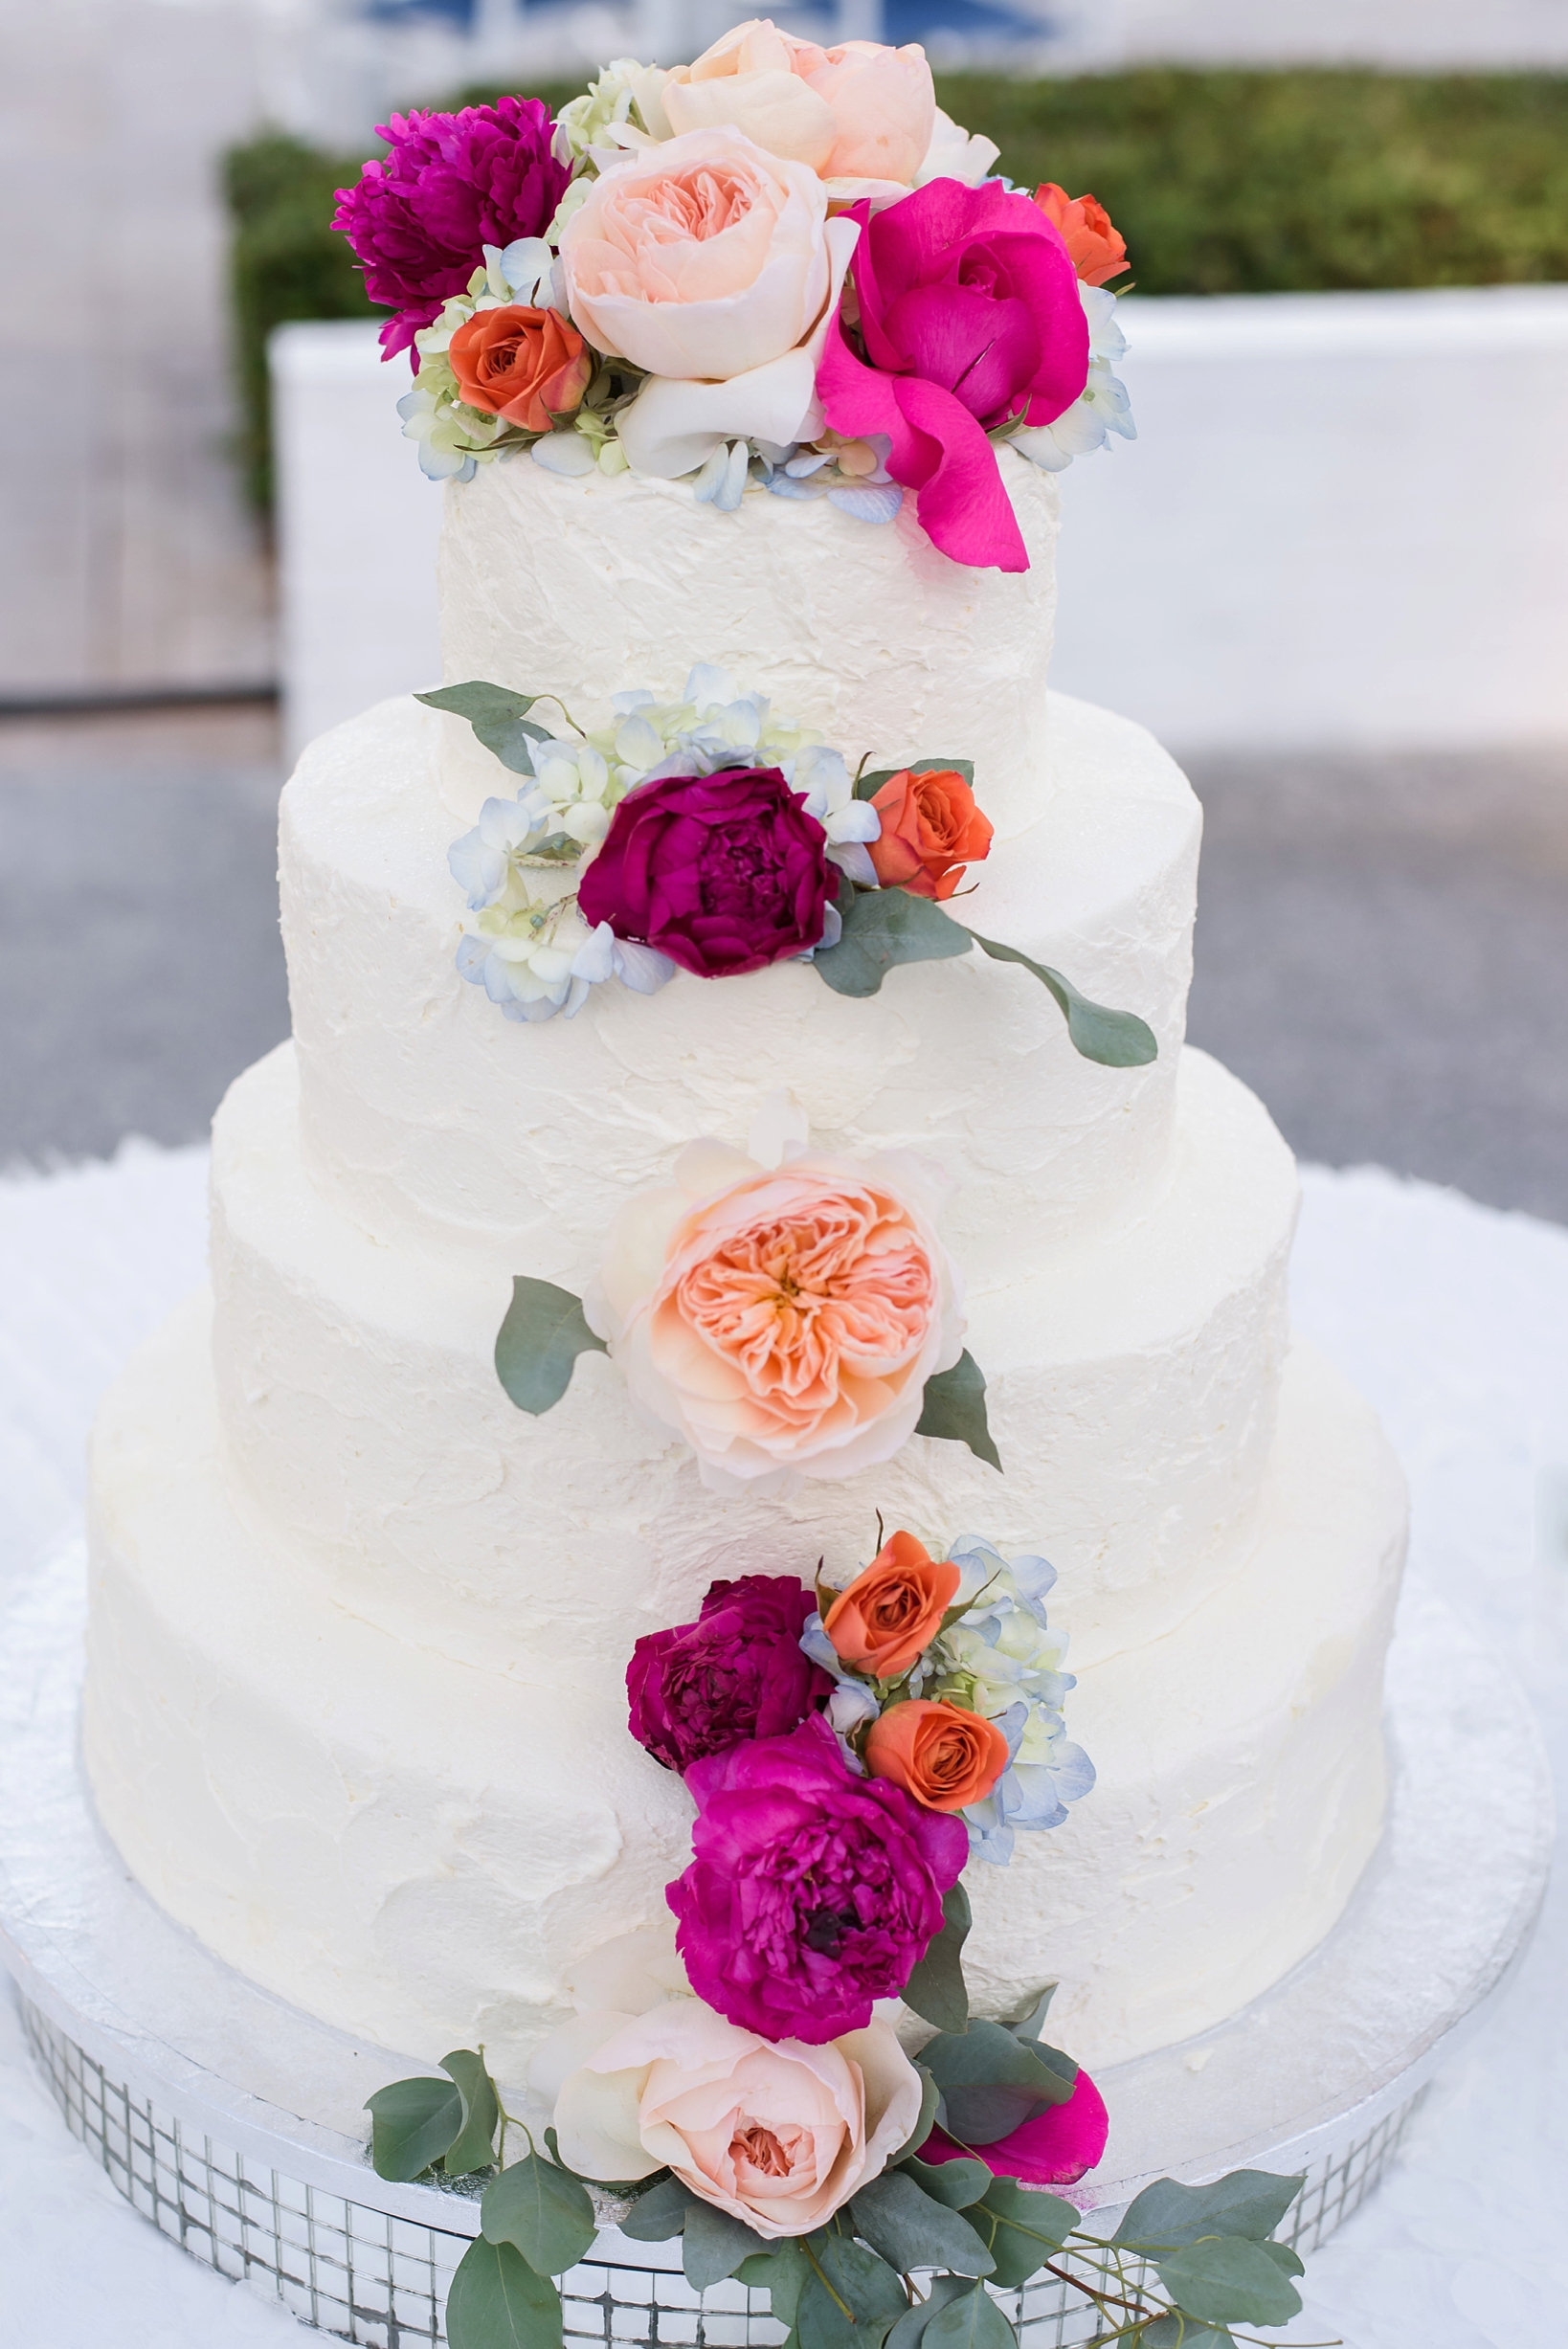 The wedding cake with huge colorful flowers and eucalyptus leaves by Sarah & Ben Photography